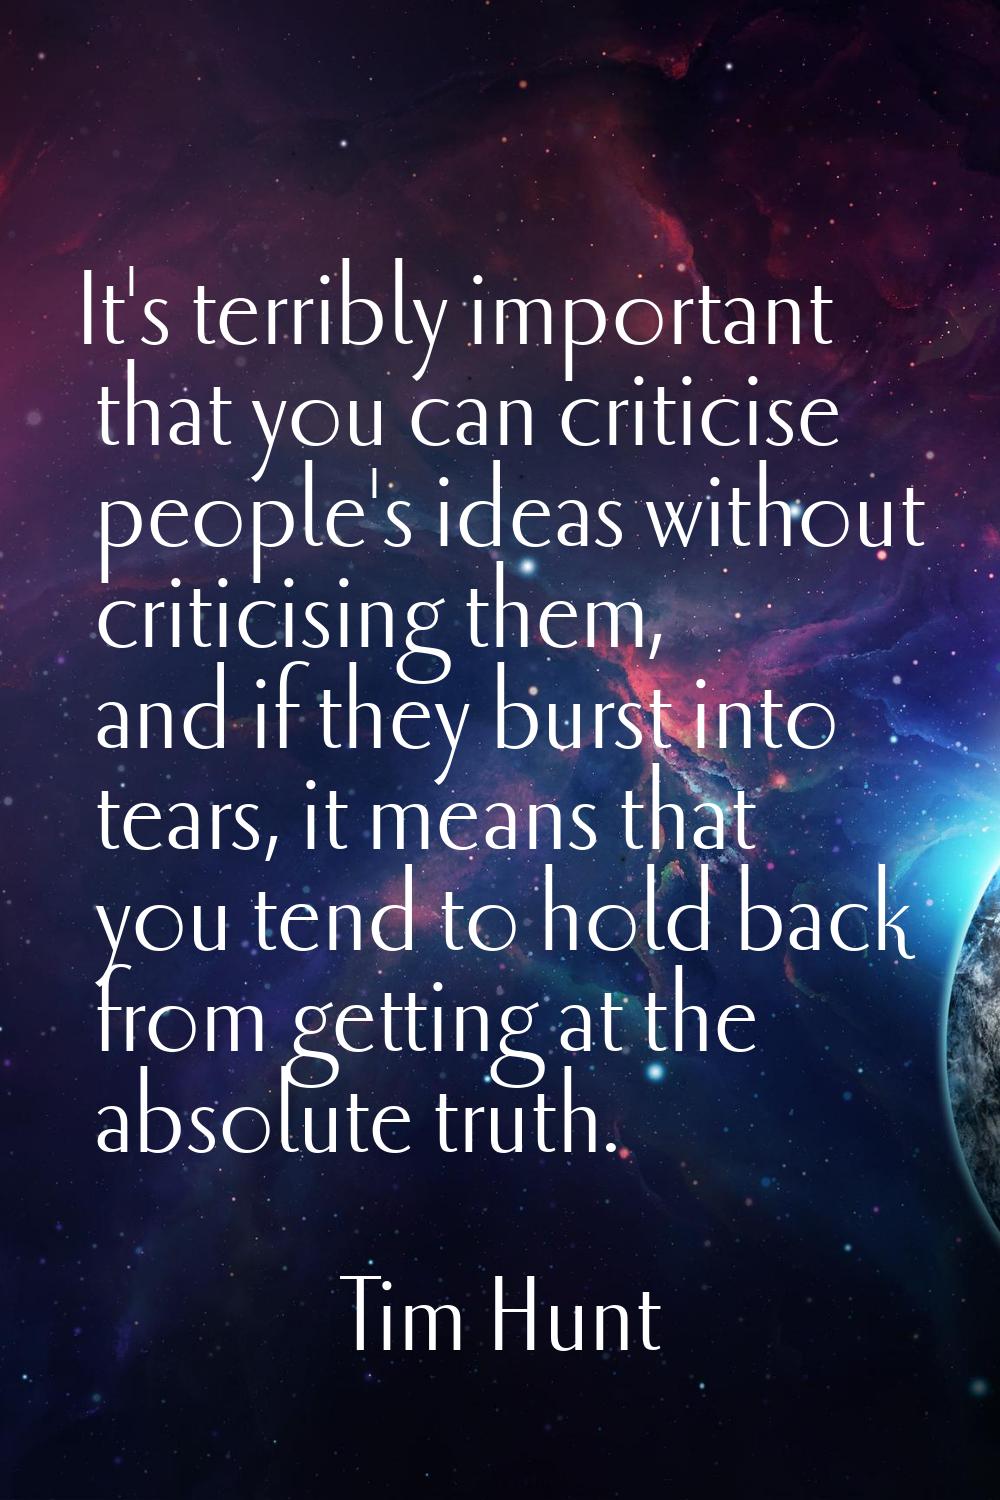 It's terribly important that you can criticise people's ideas without criticising them, and if they